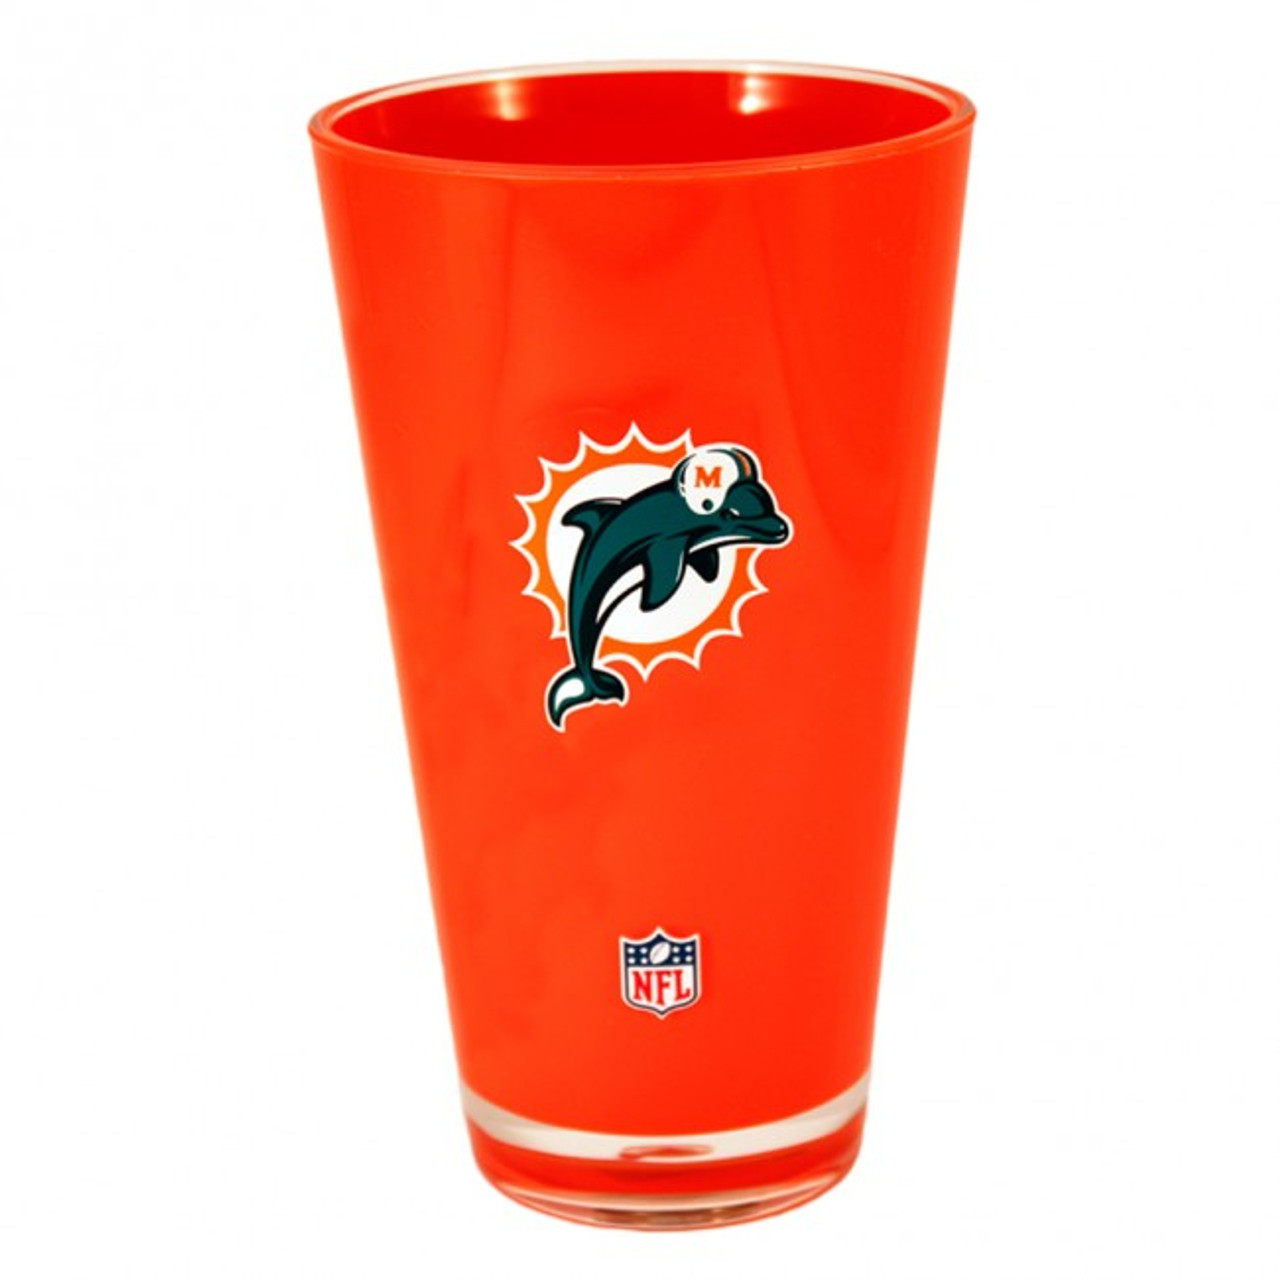 https://cdn11.bigcommerce.com/s-d0a73/images/stencil/1280x1280/products/3022/64929/Miami_Dolphins_Colored_Tumbler_-_Orange_-_Dragon_Sports__67398.1677399382.jpg?c=2